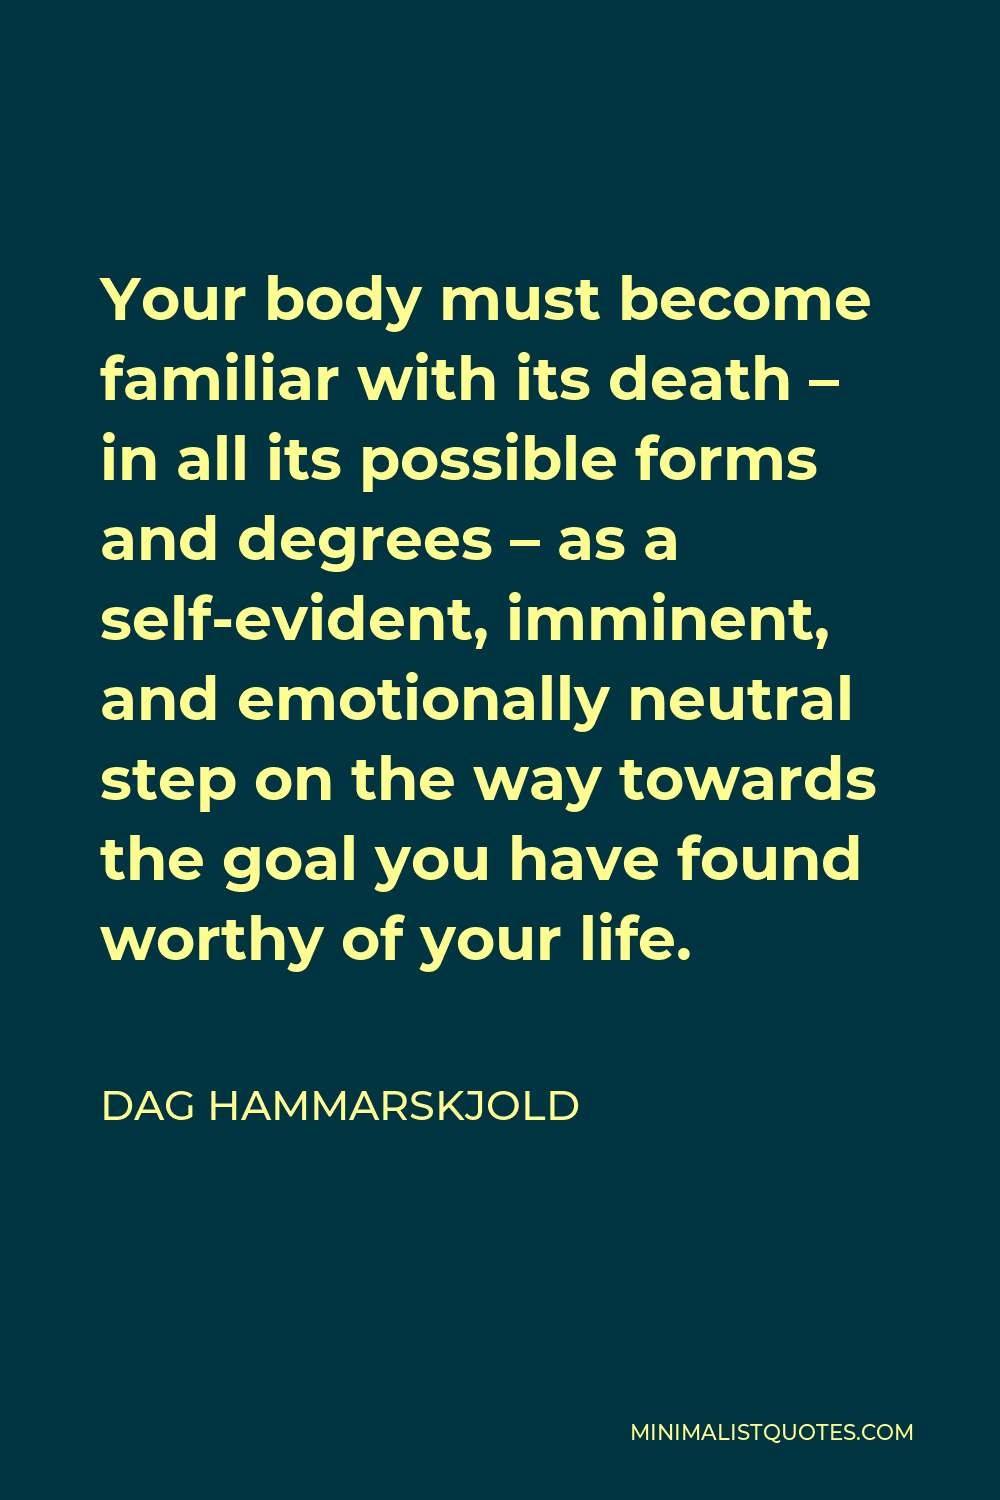 Dag Hammarskjold Quote - Your body must become familiar with its death – in all its possible forms and degrees – as a self-evident, imminent, and emotionally neutral step on the way towards the goal you have found worthy of your life.